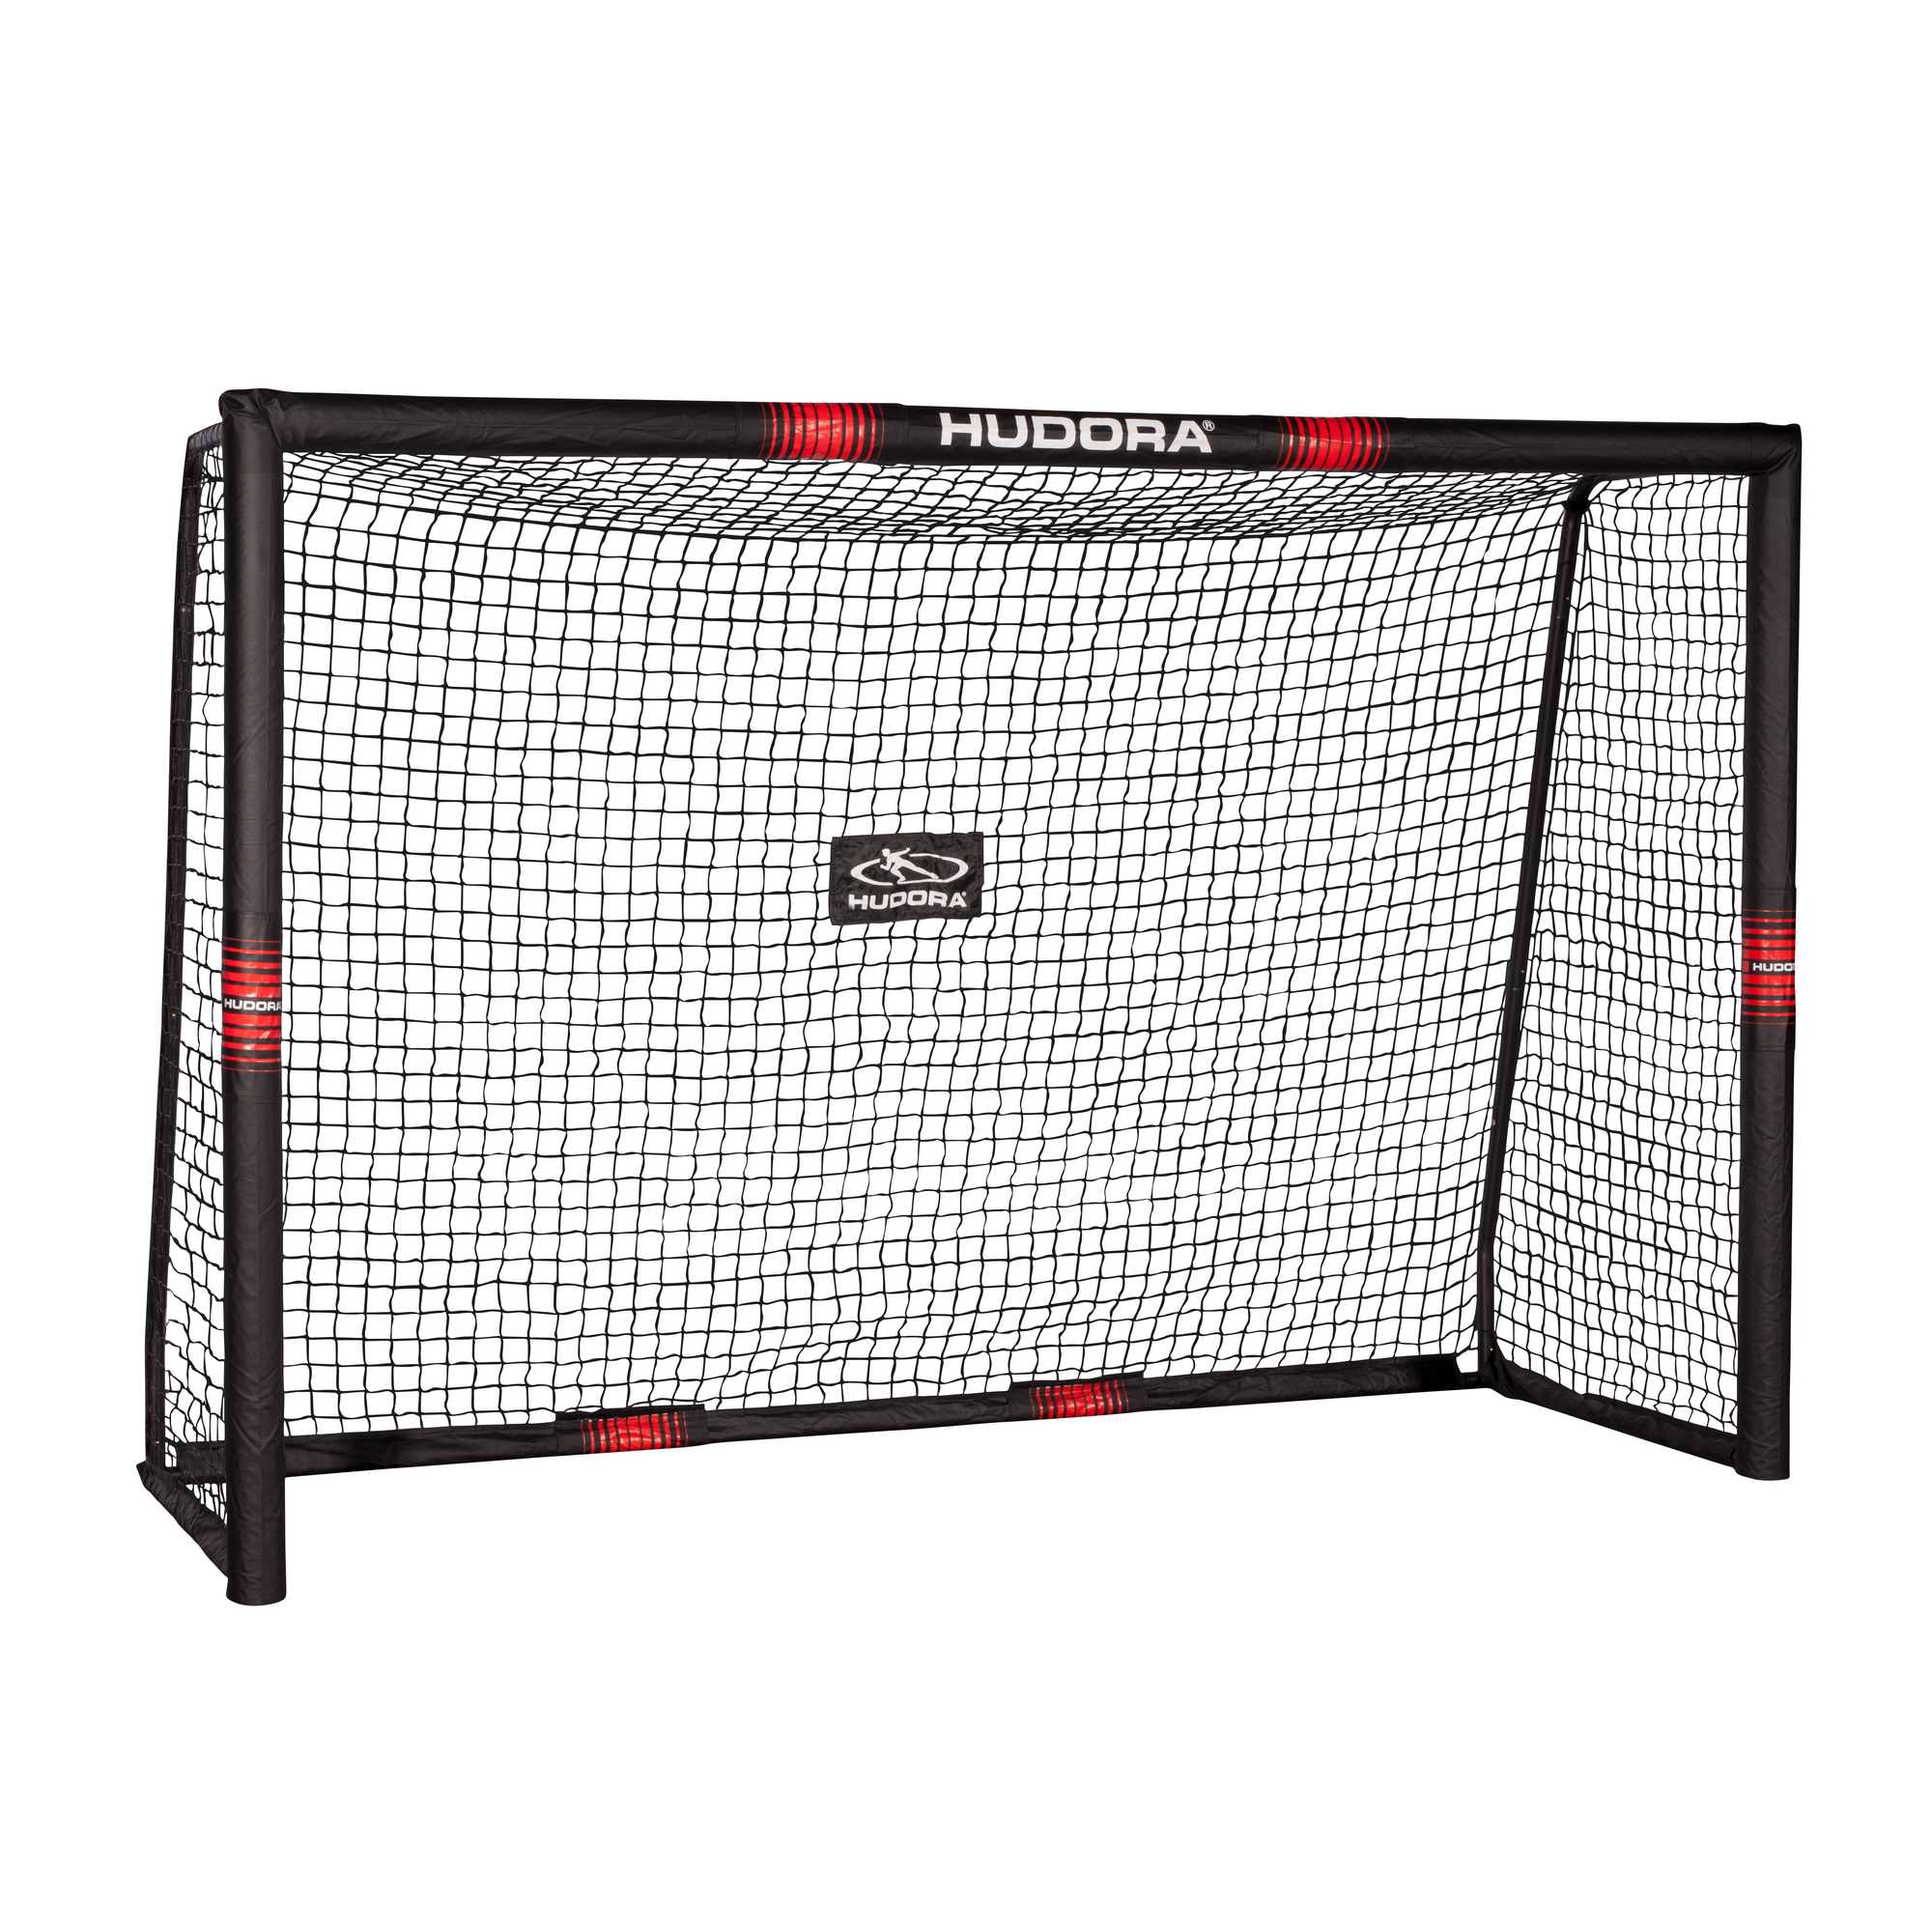 Fußballtor Pro Tect 240 + product picture